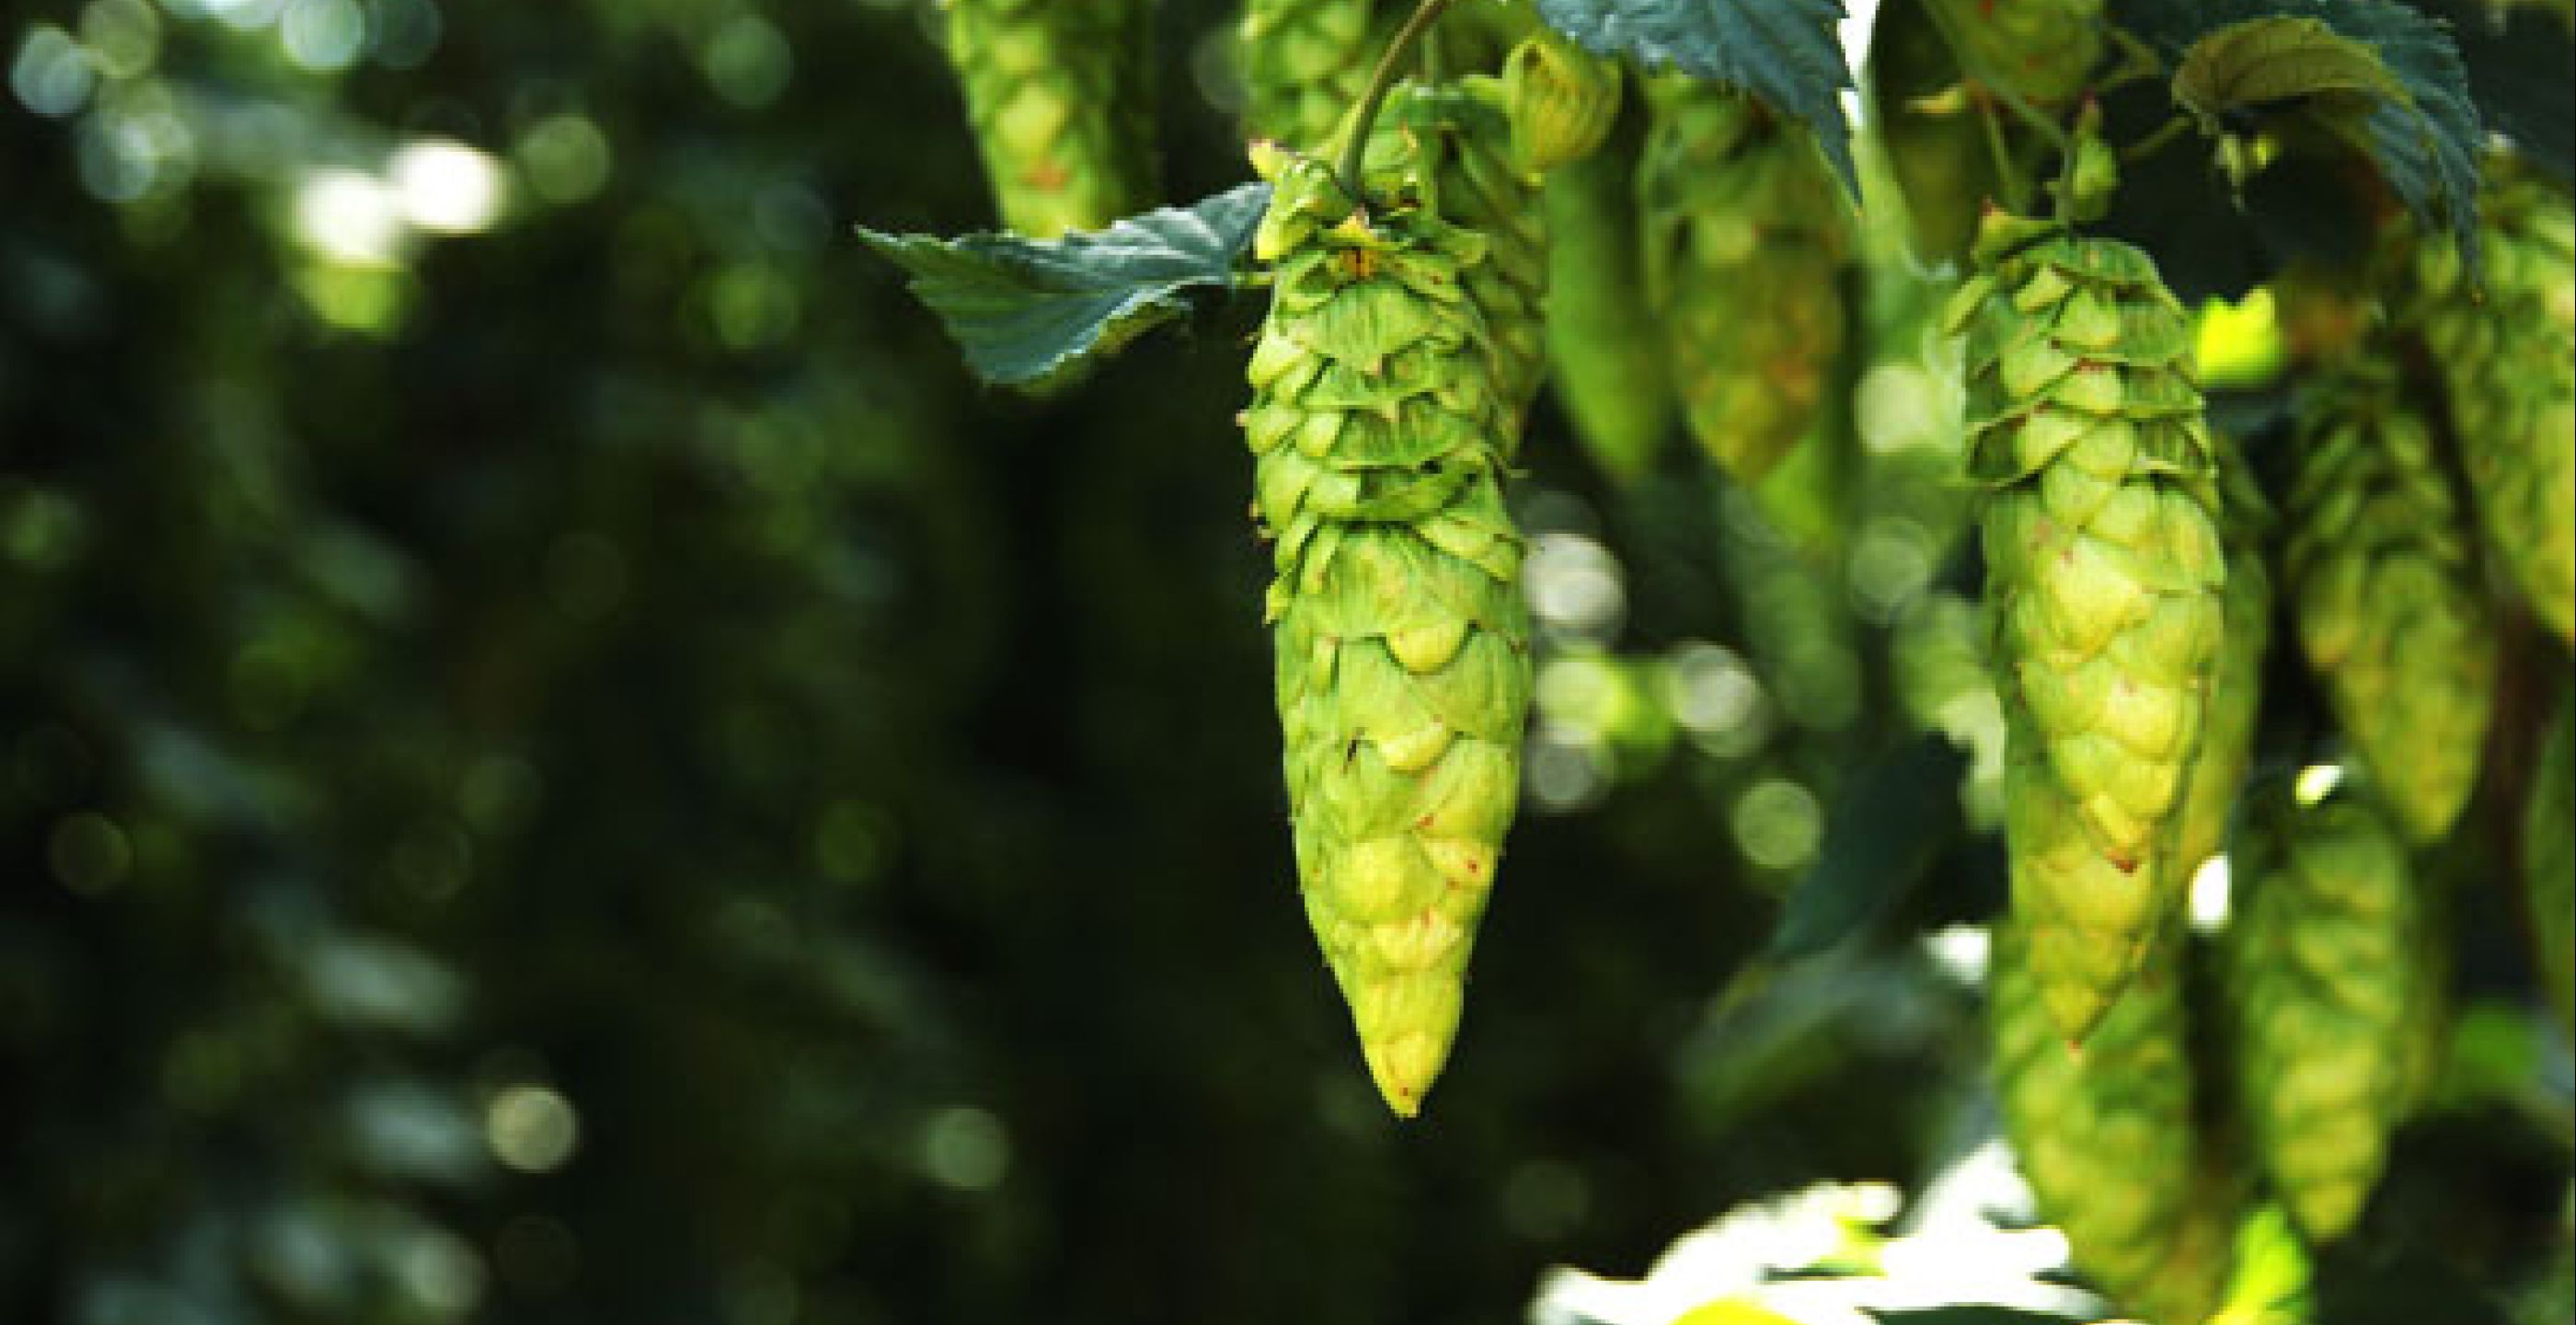 James Halliday Article: On The Hop